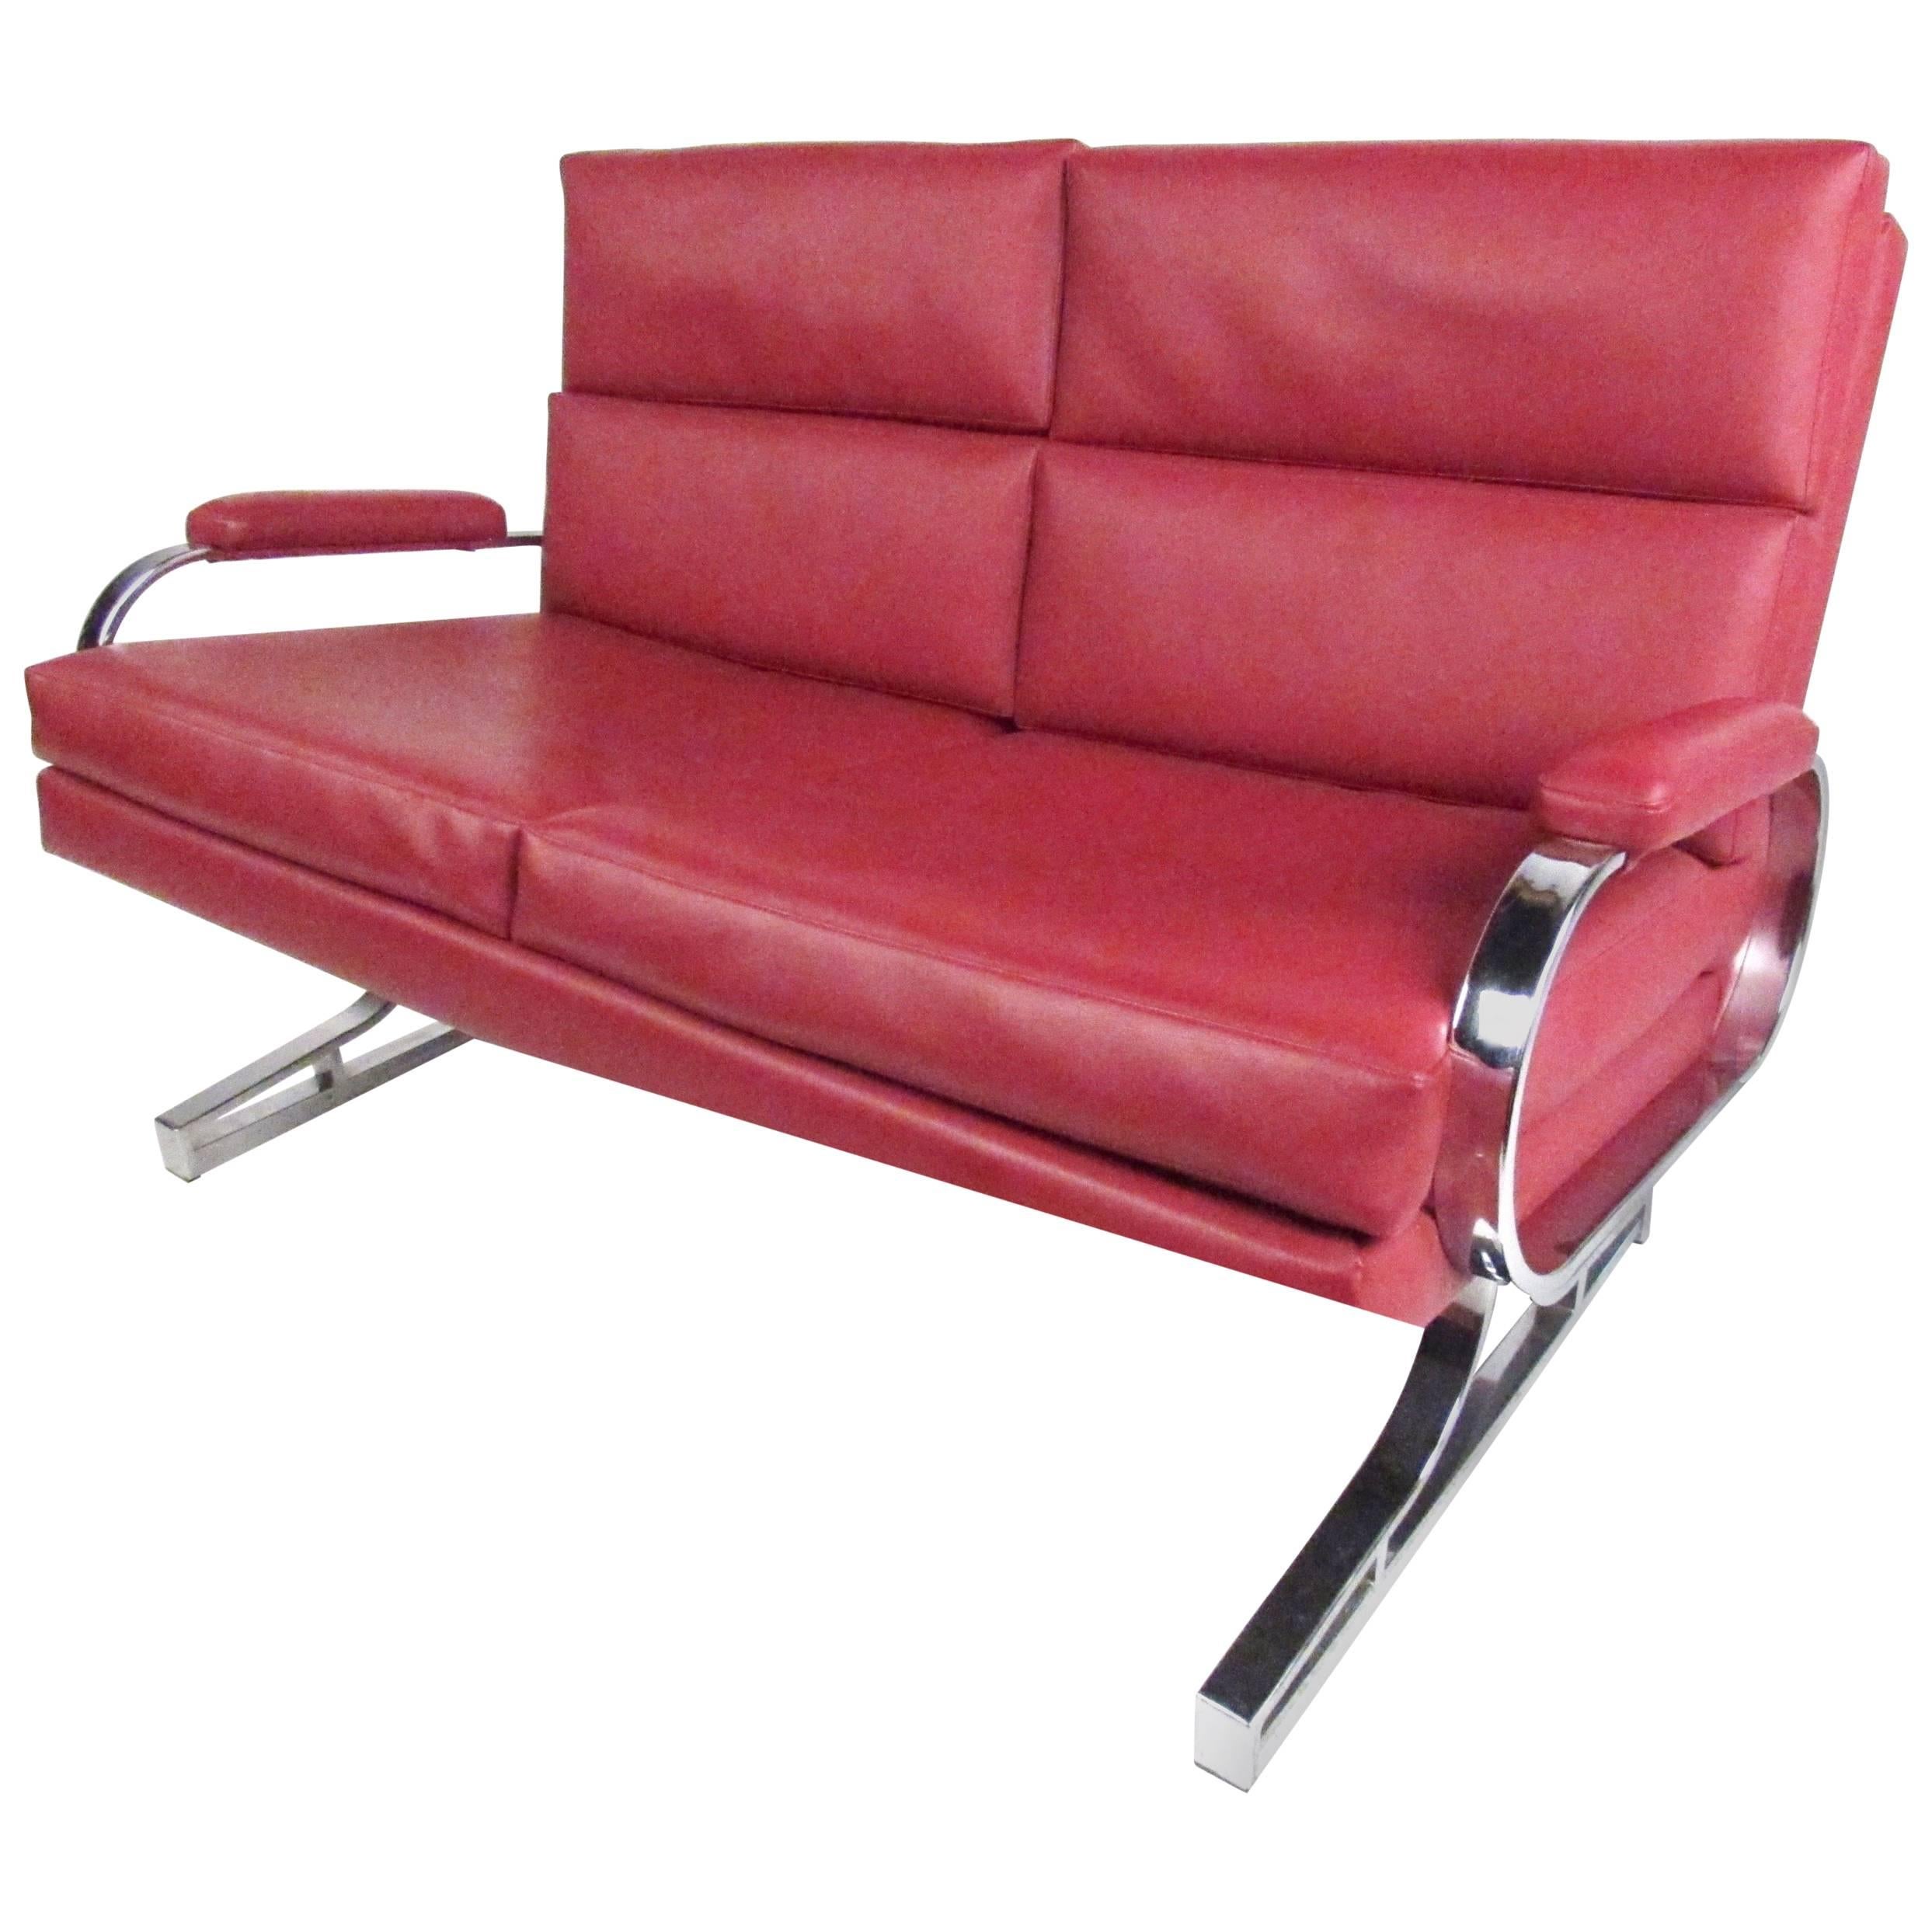 Stylish Contemporary Modern Loveseat For Sale